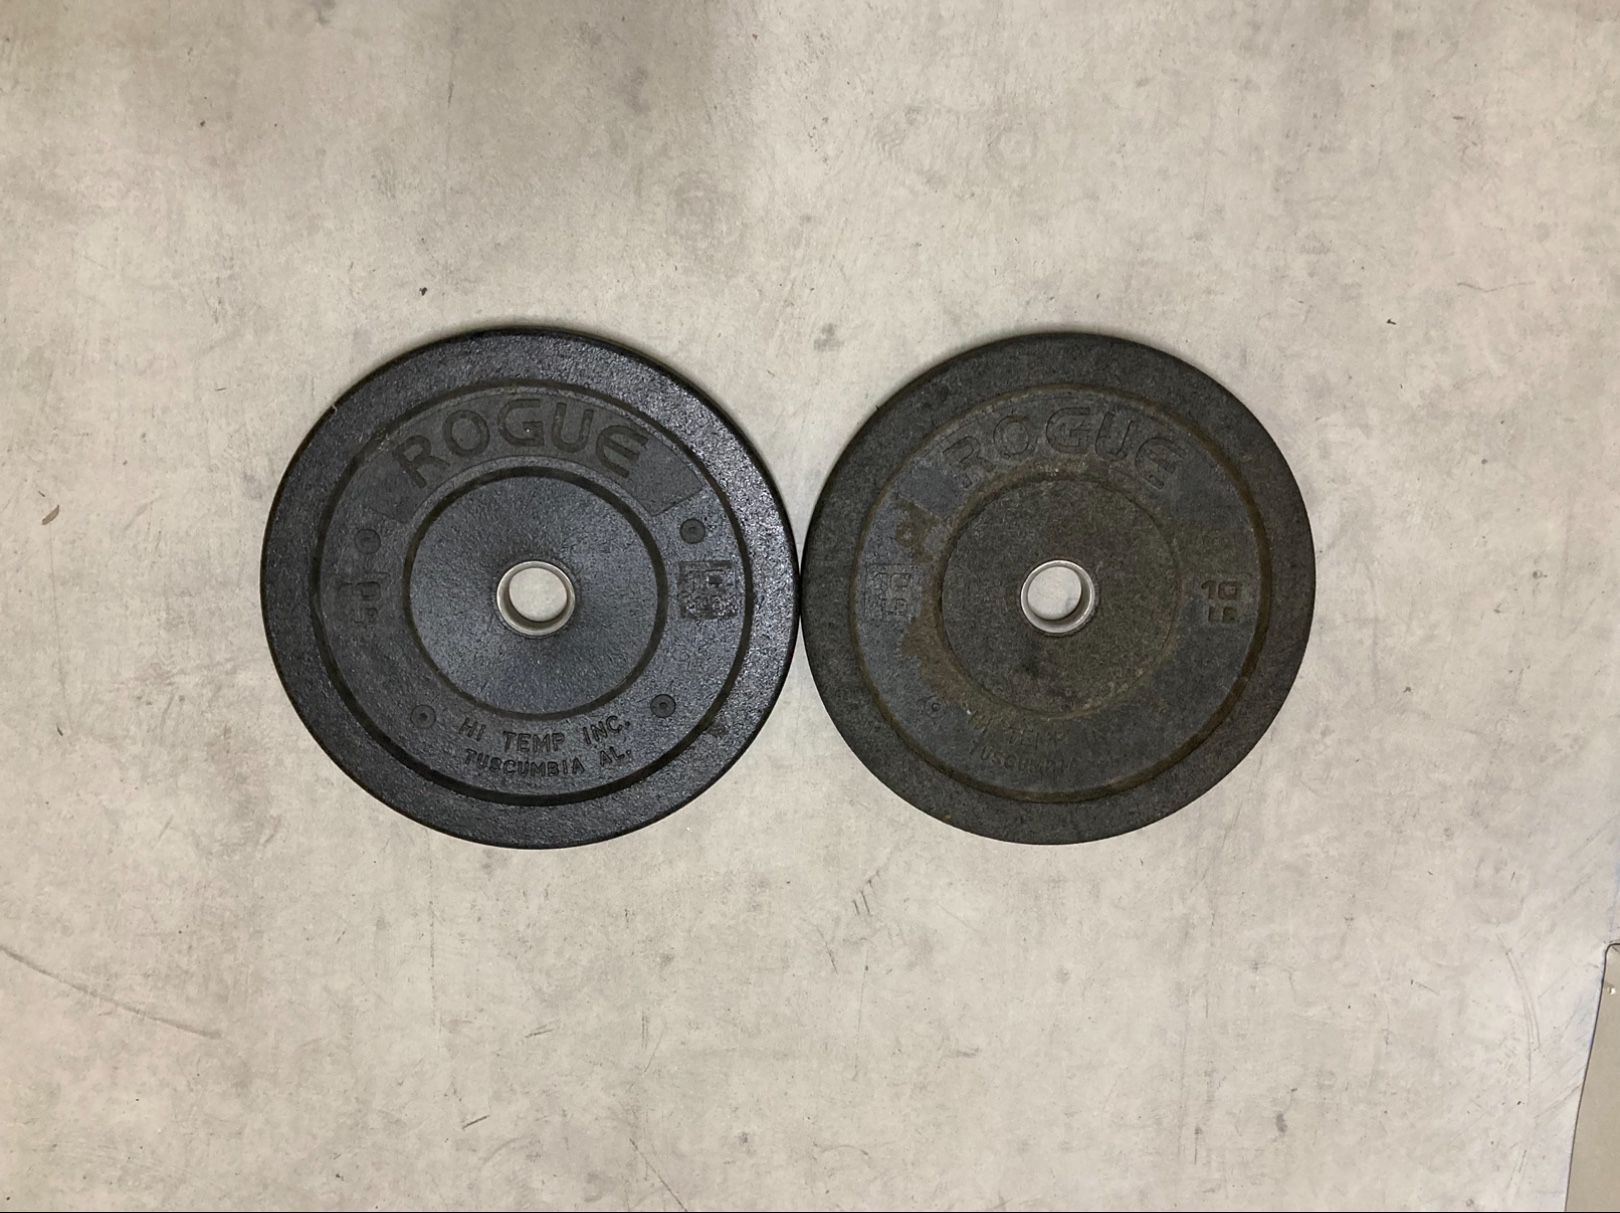 10 lb Olympic 2” hole weight Rogue Fitness Hi-Temp Bumper plate set 20 lbs plates weights weight 10lbs 10lb size for Barbell bar pair Bumpers